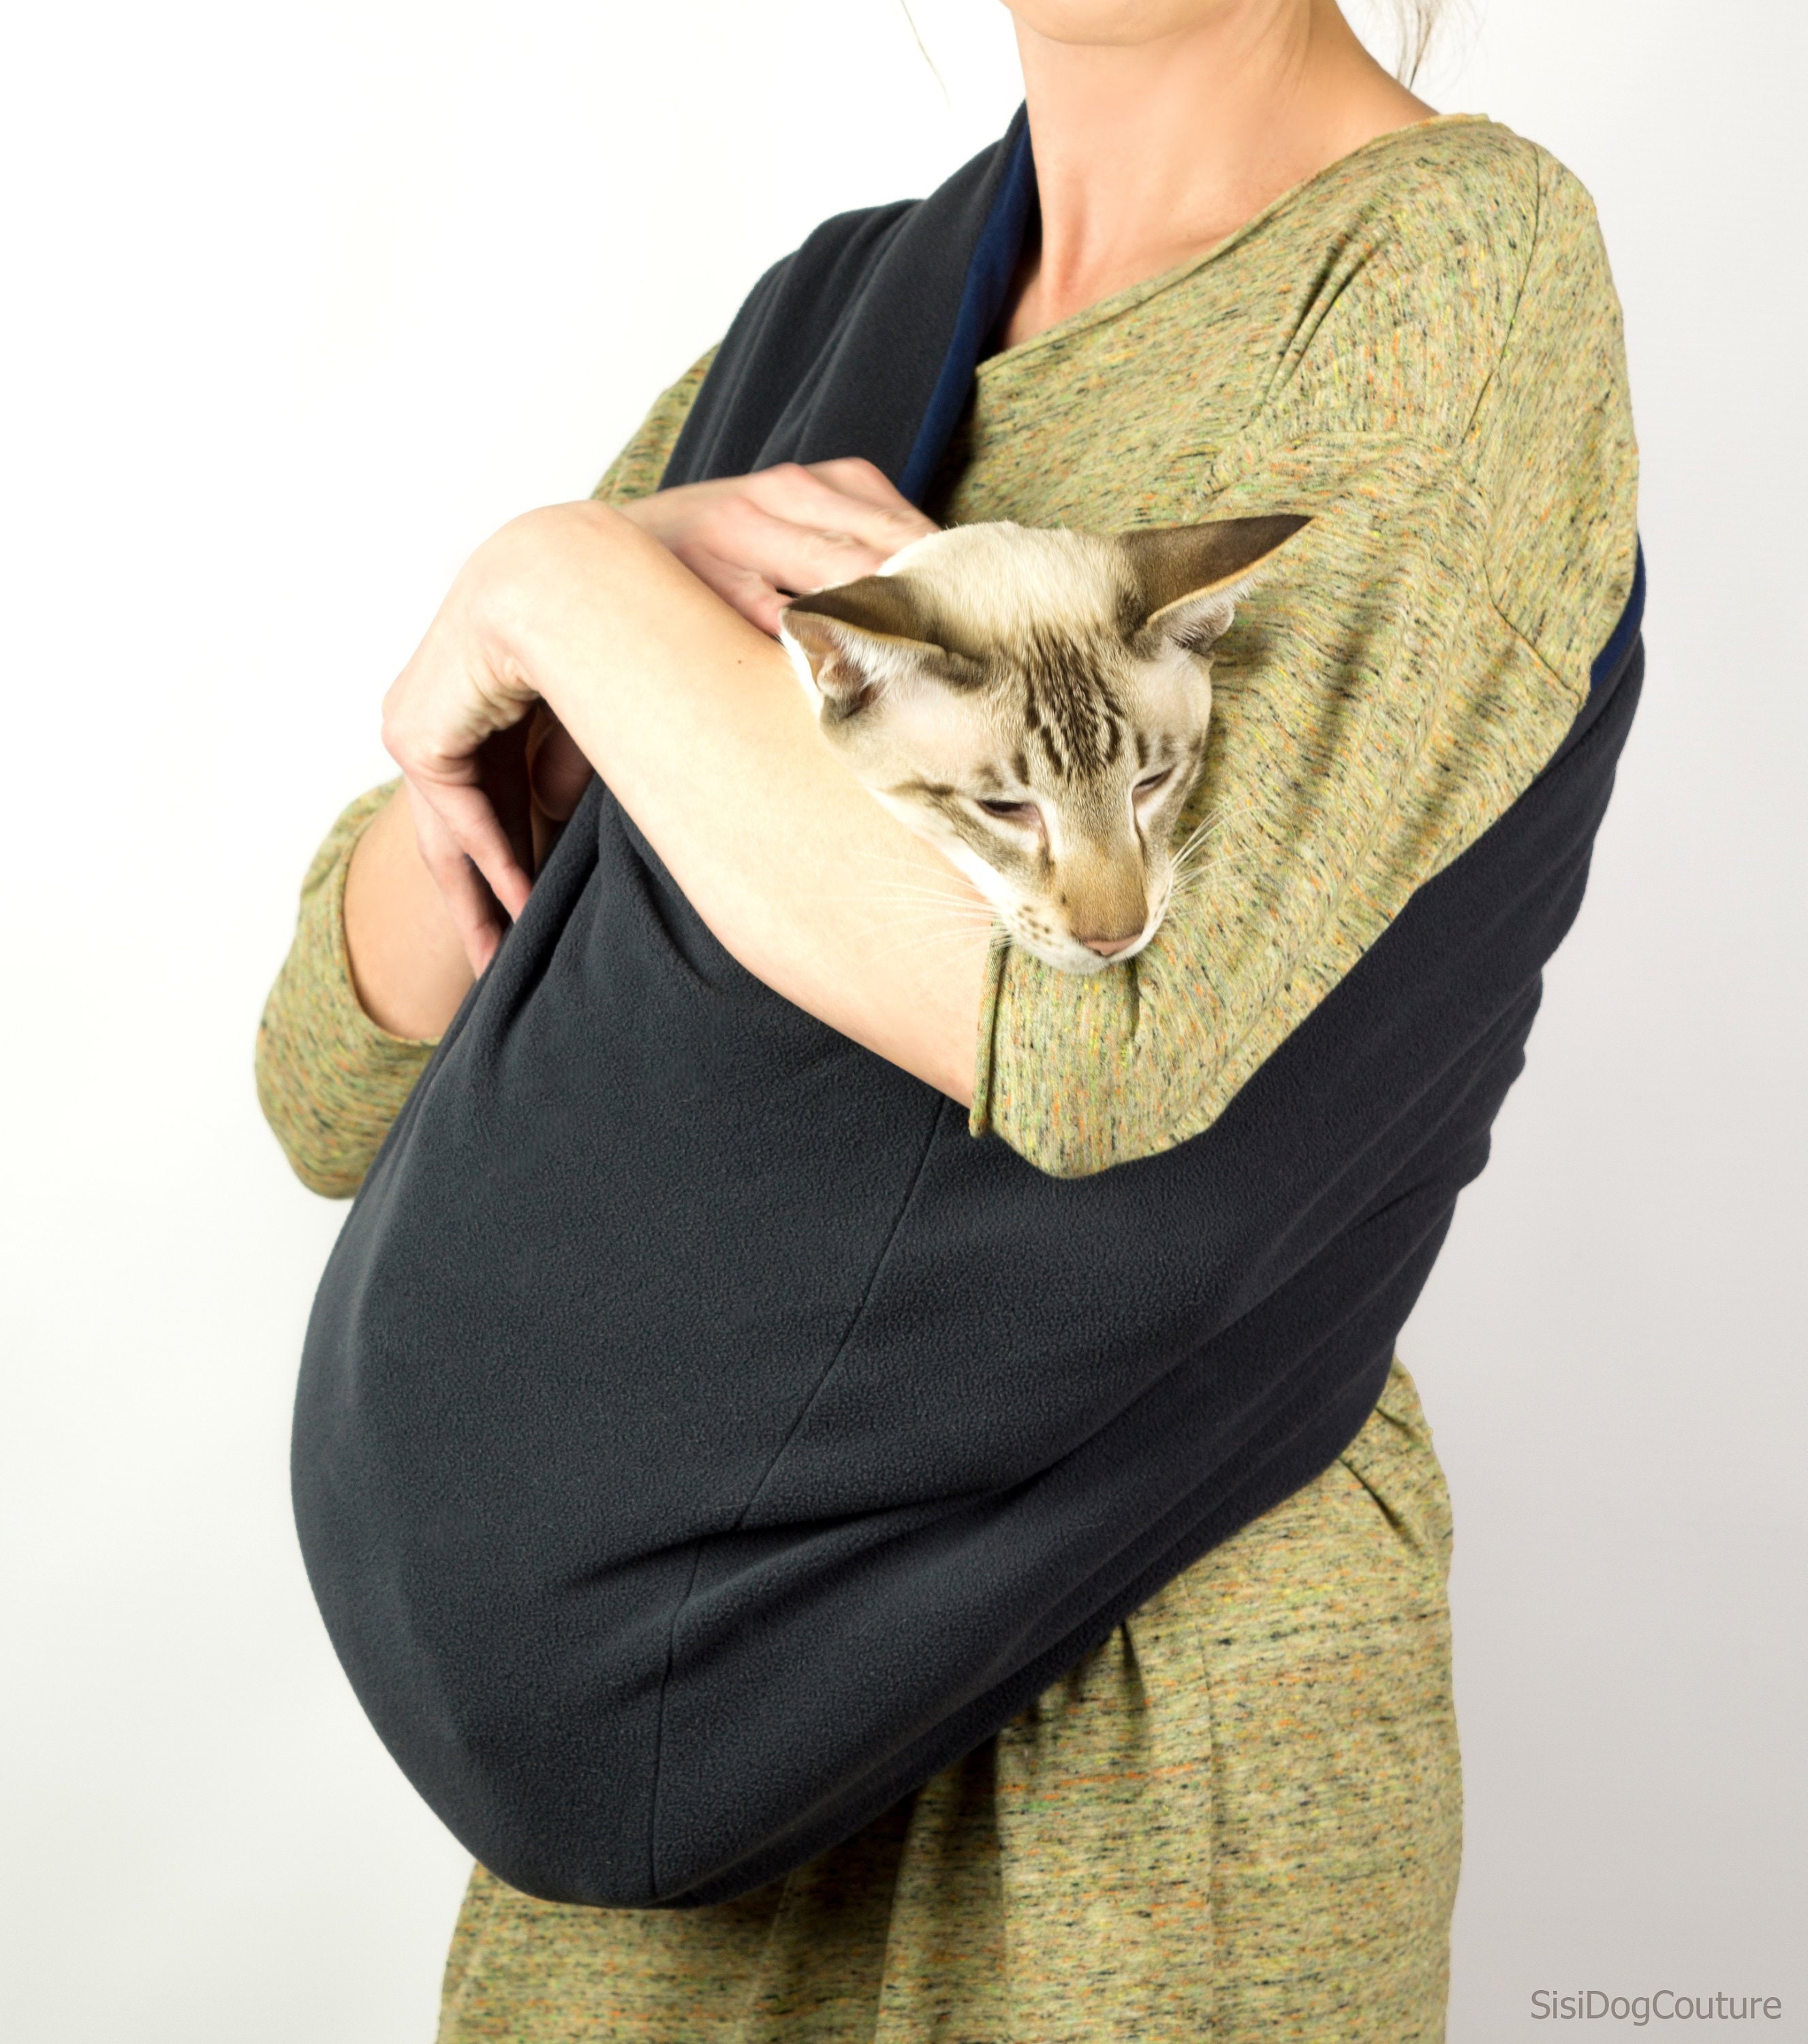 Cat Sling Carrier, Baby Style Cat Carrier